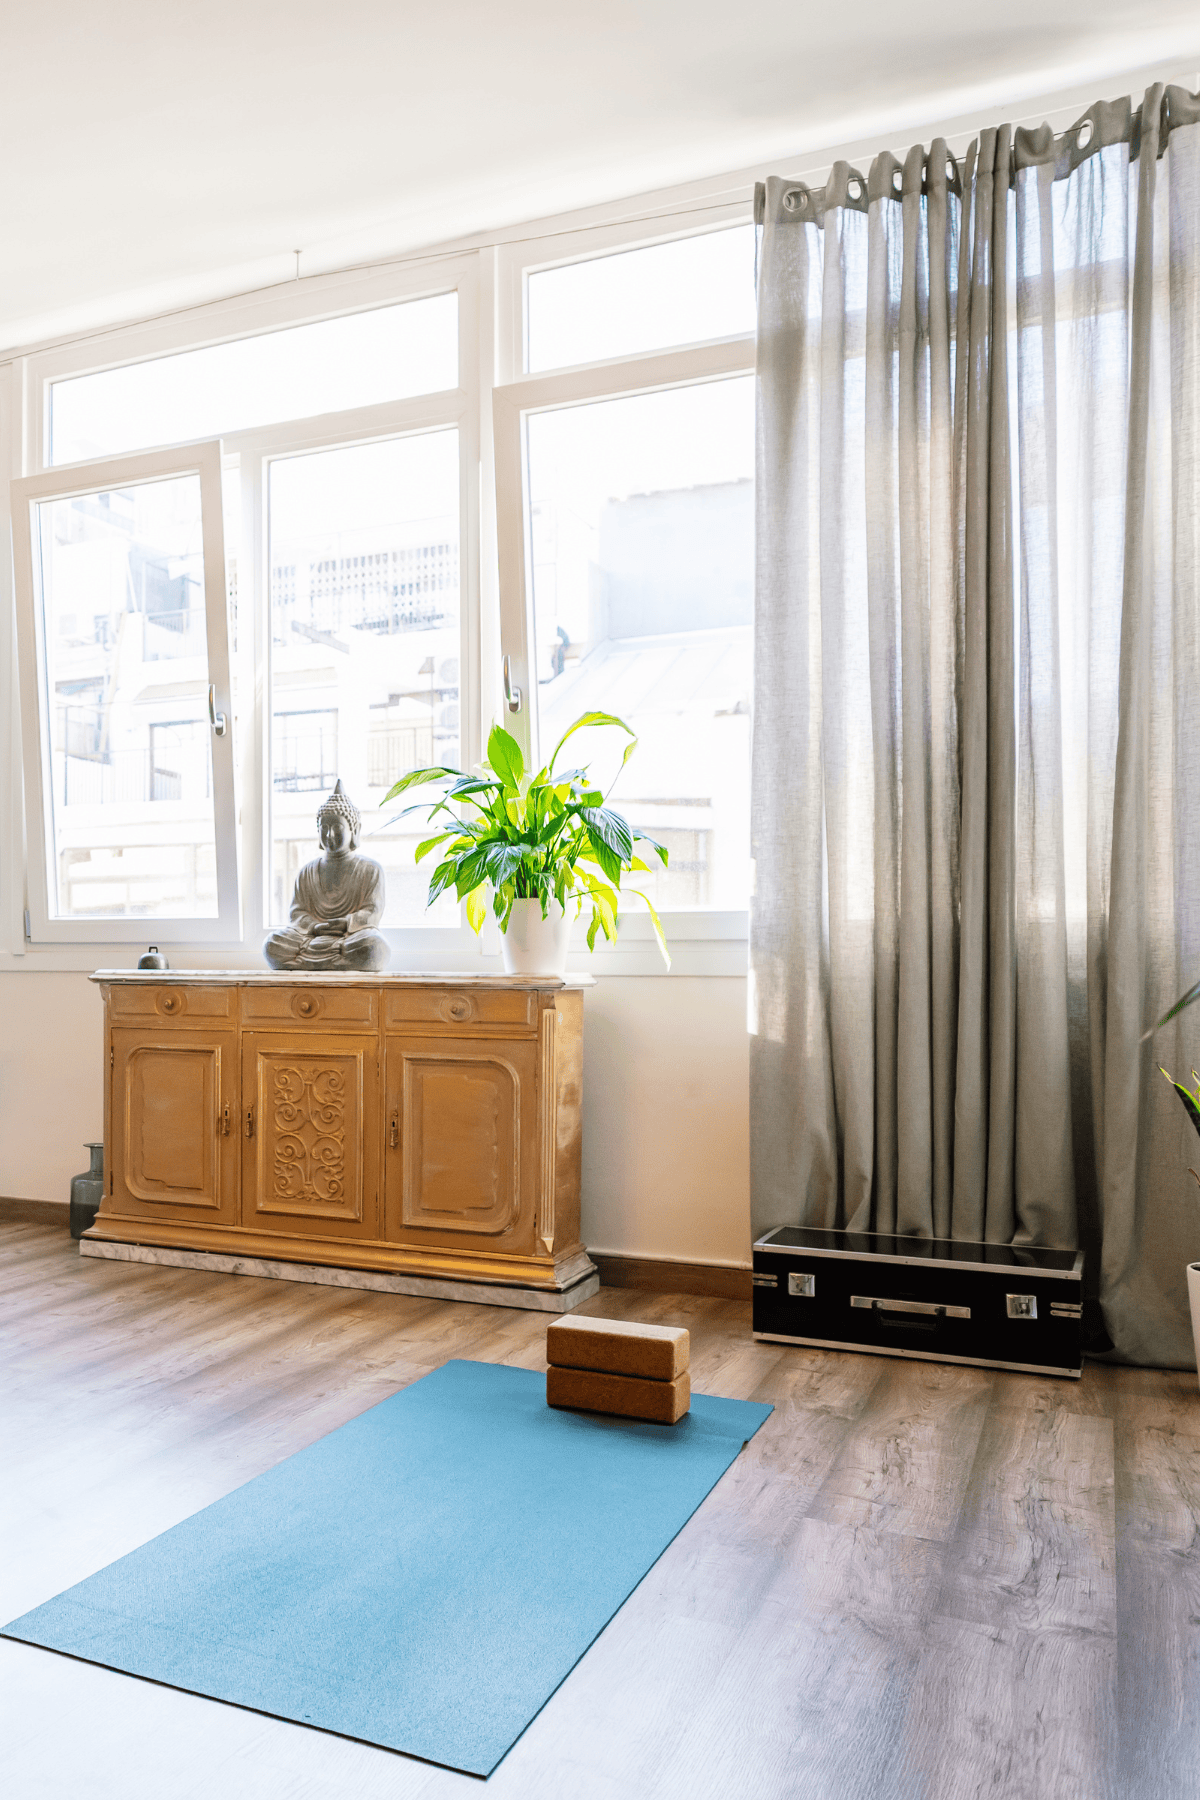 Tips To Make Your Yoga Space More Zen!